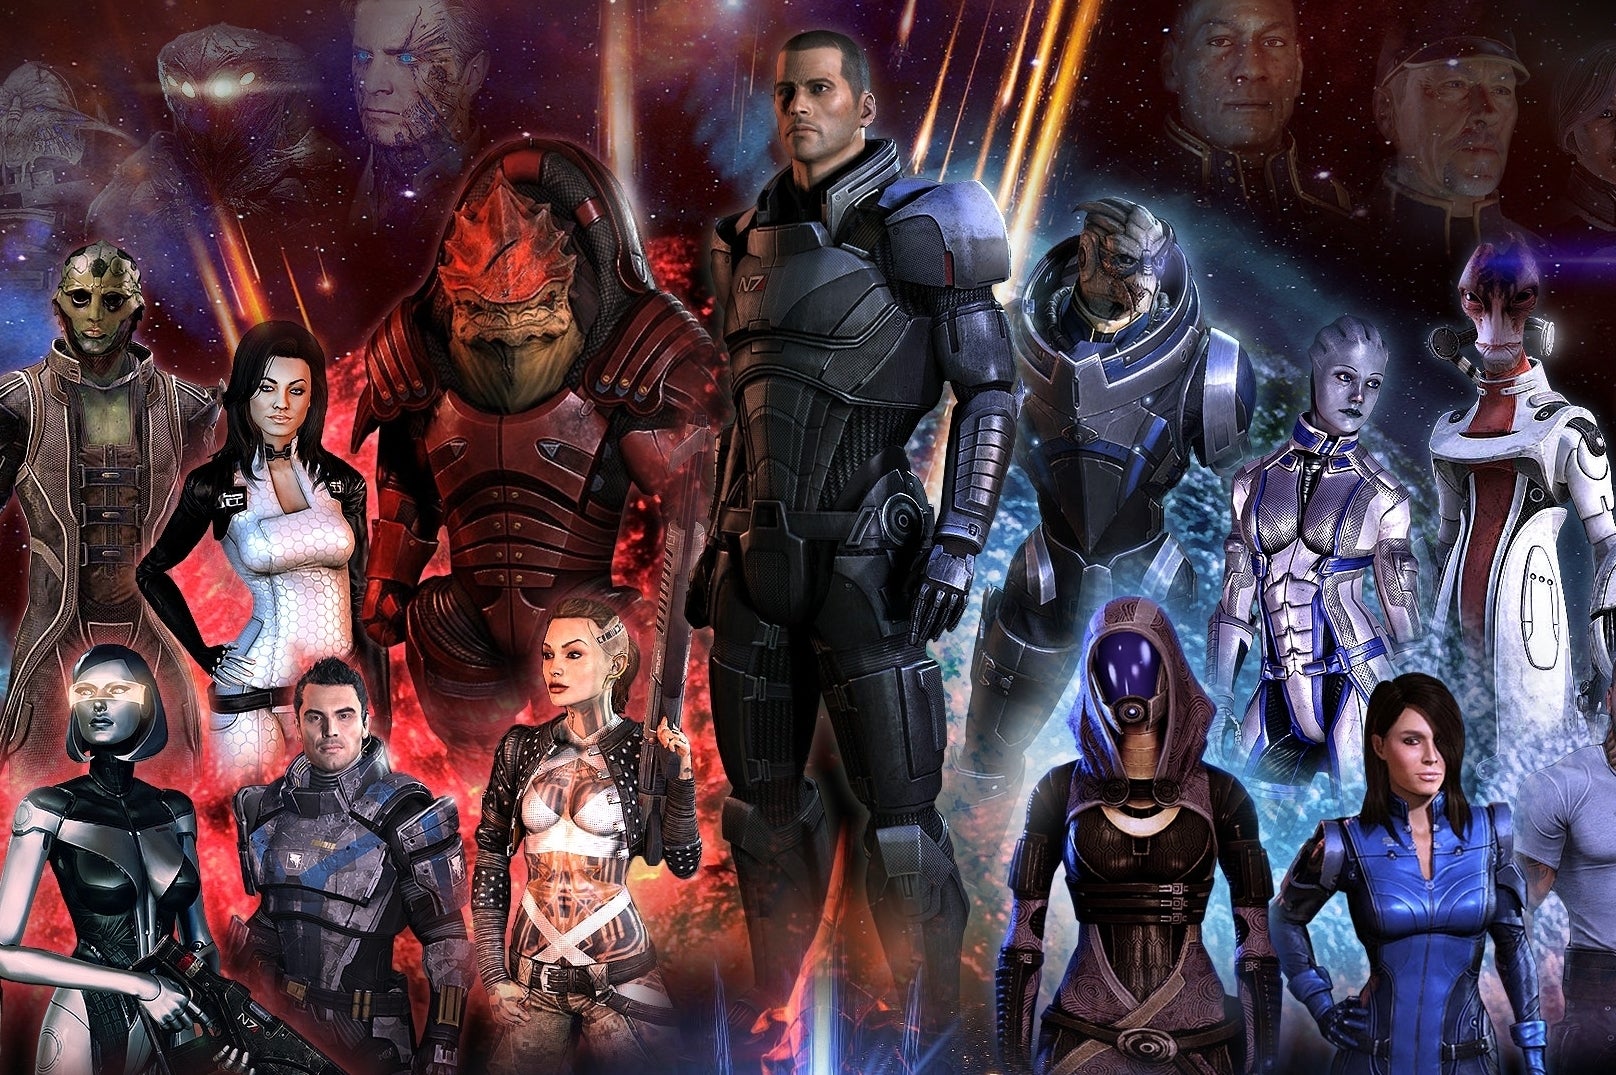 Image for BioWare "all hands on deck" for new Mass Effect 3 DLC